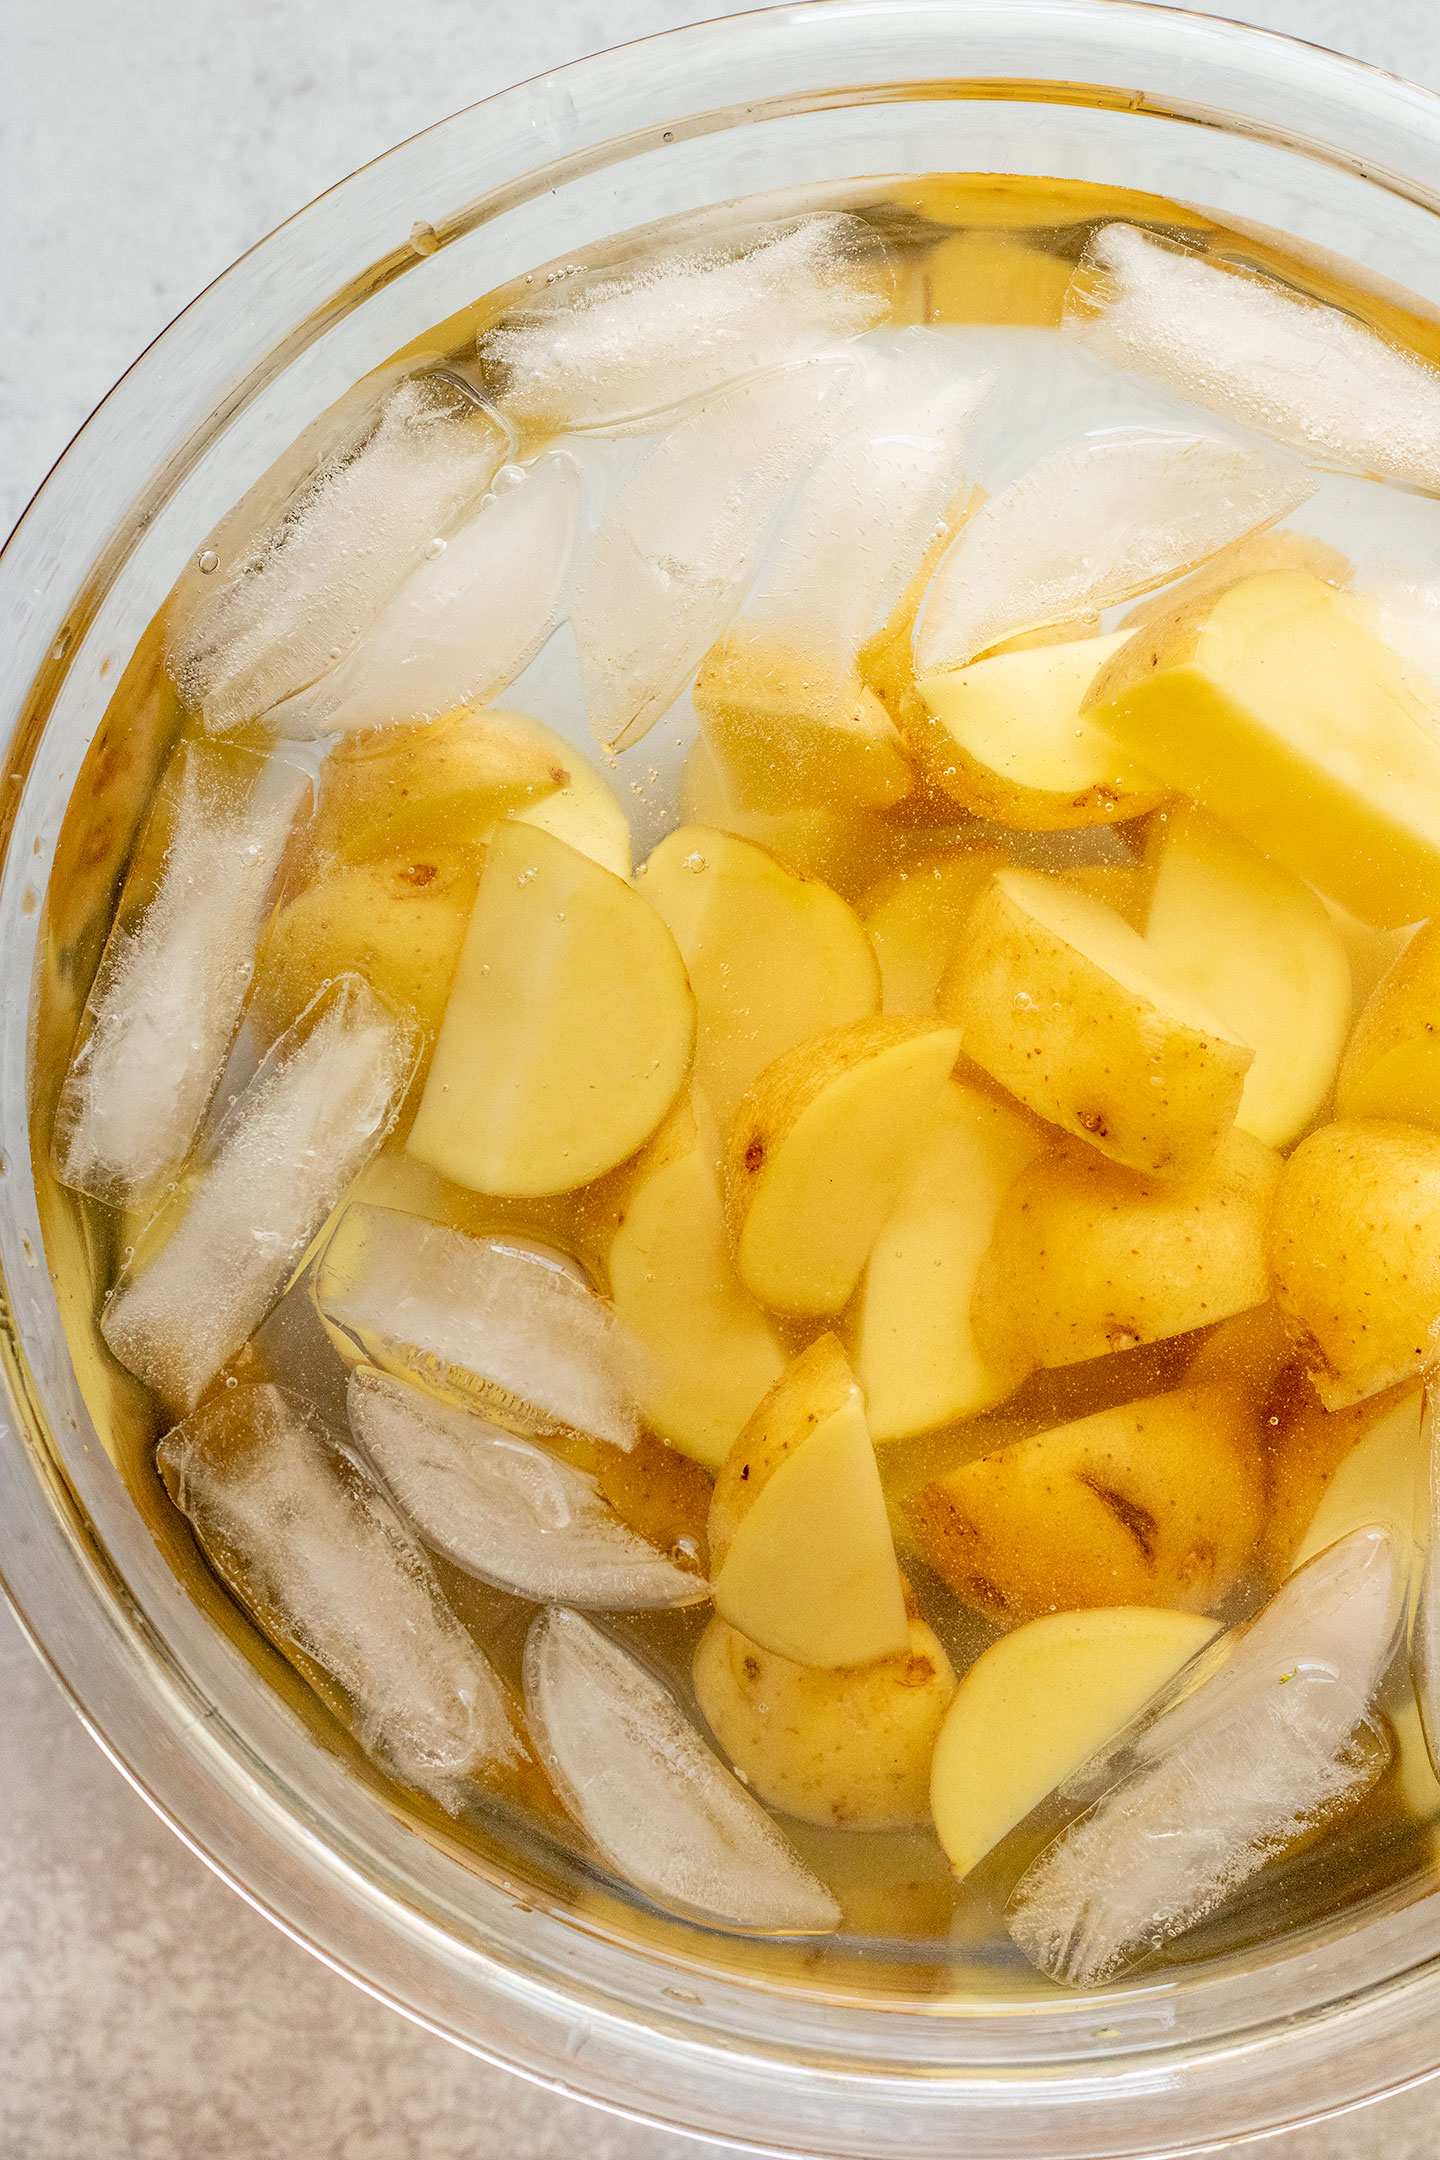 Chopped potatoes being soaked in ice cold water.